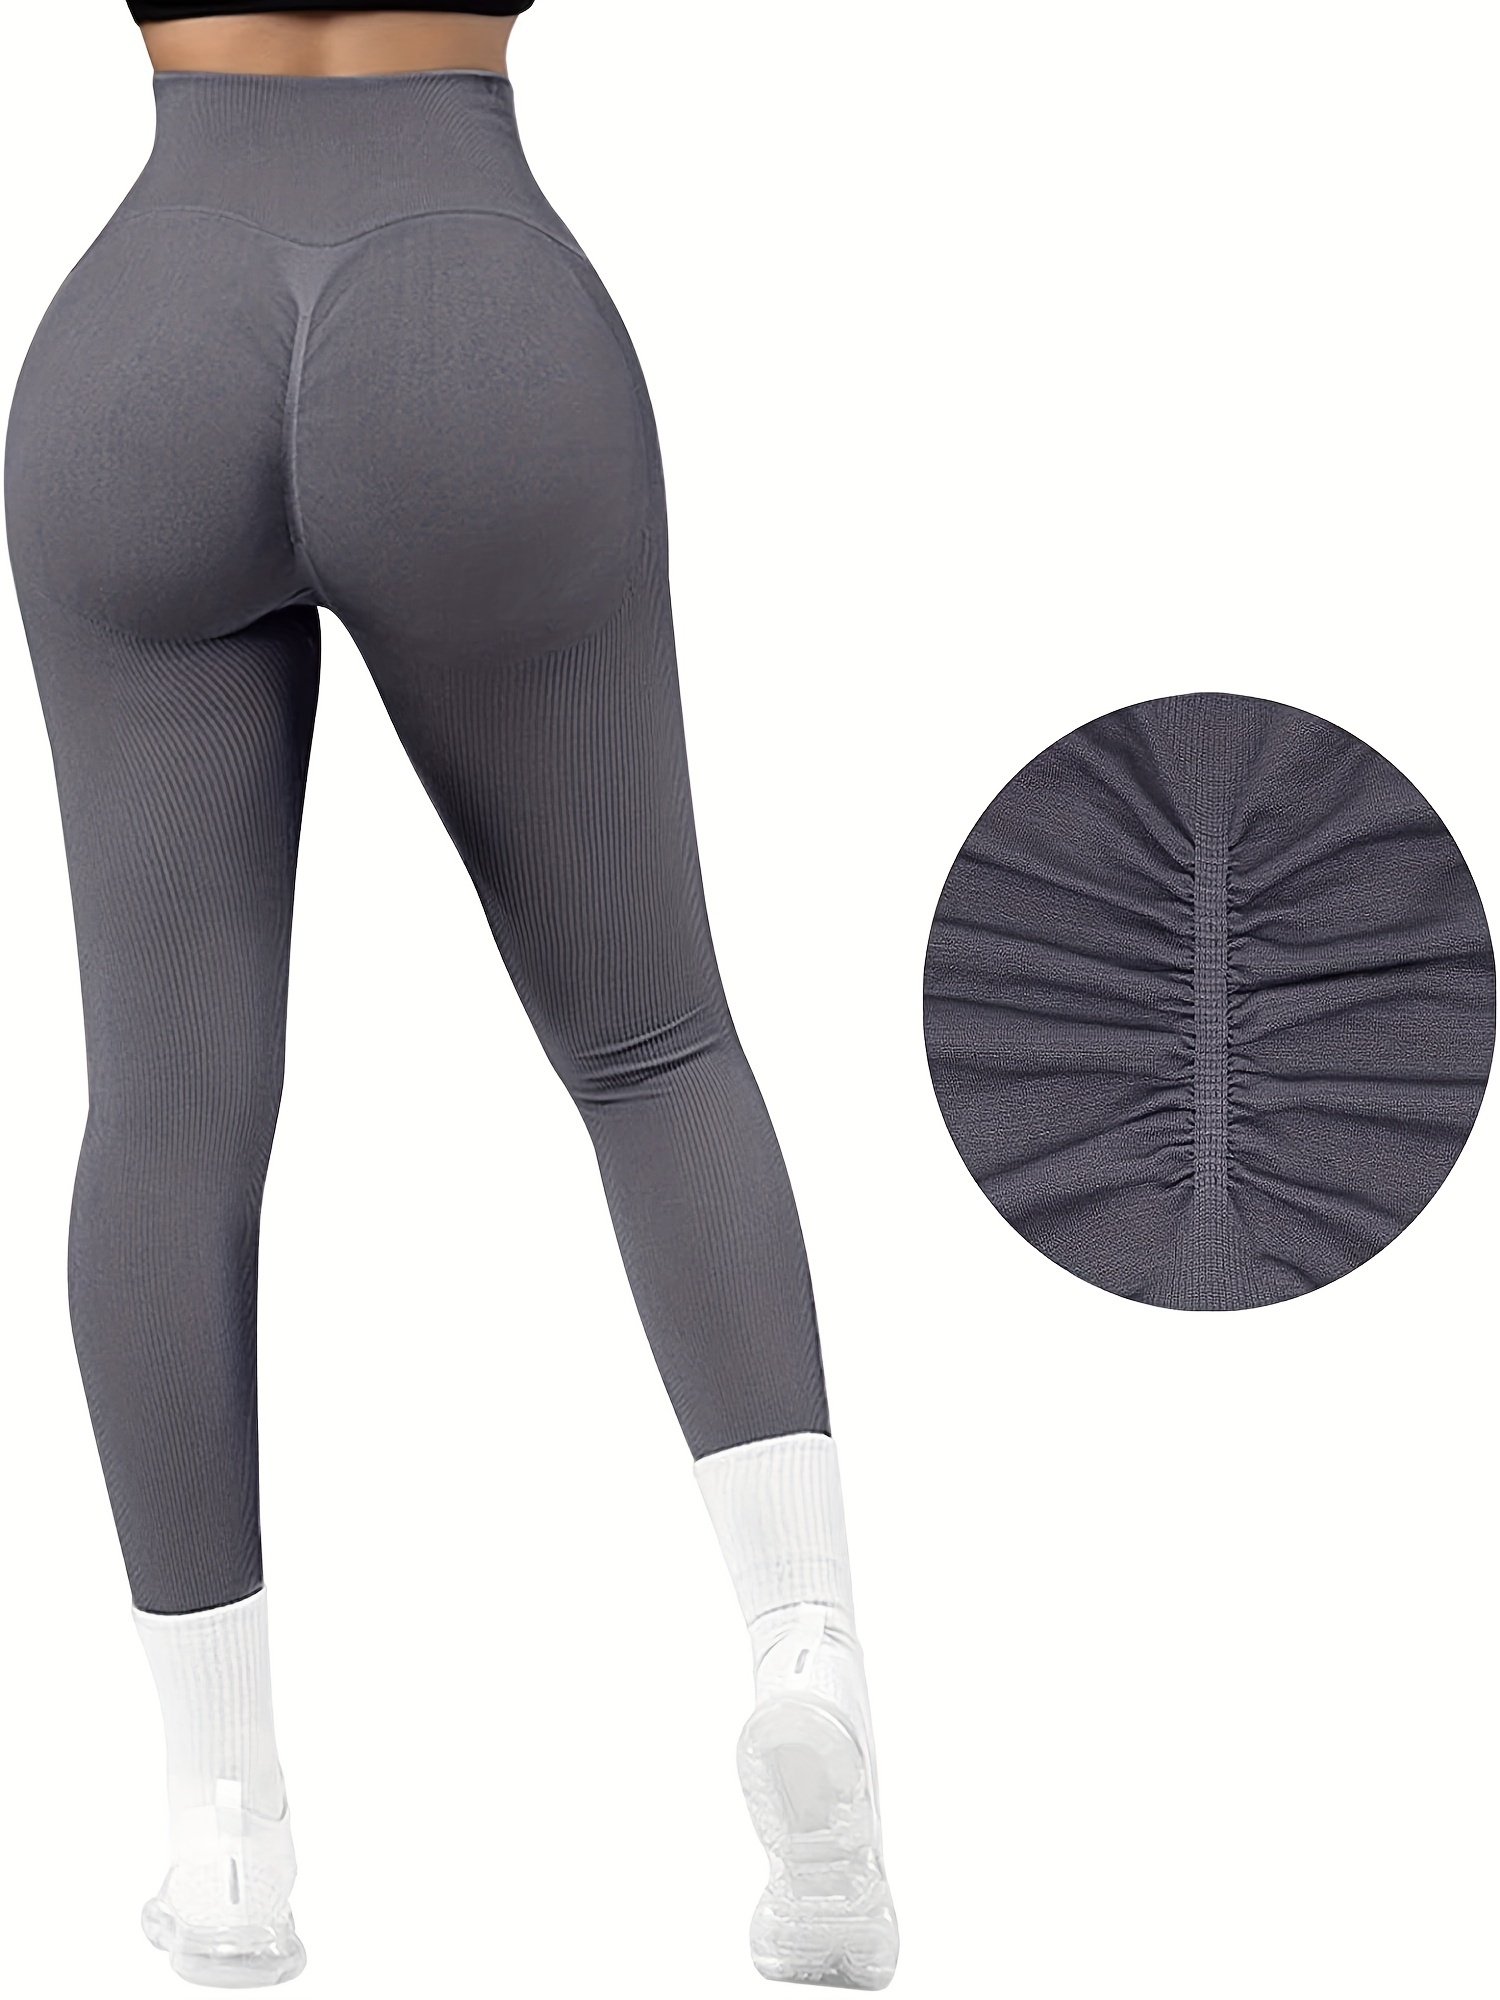 My Orders Placed My Account Leggings for Women Tummy Control Scrunch Butt  Lift Workout Ruched High Waist Seamless Compression Tights Yoga Pants Black  at  Women's Clothing store